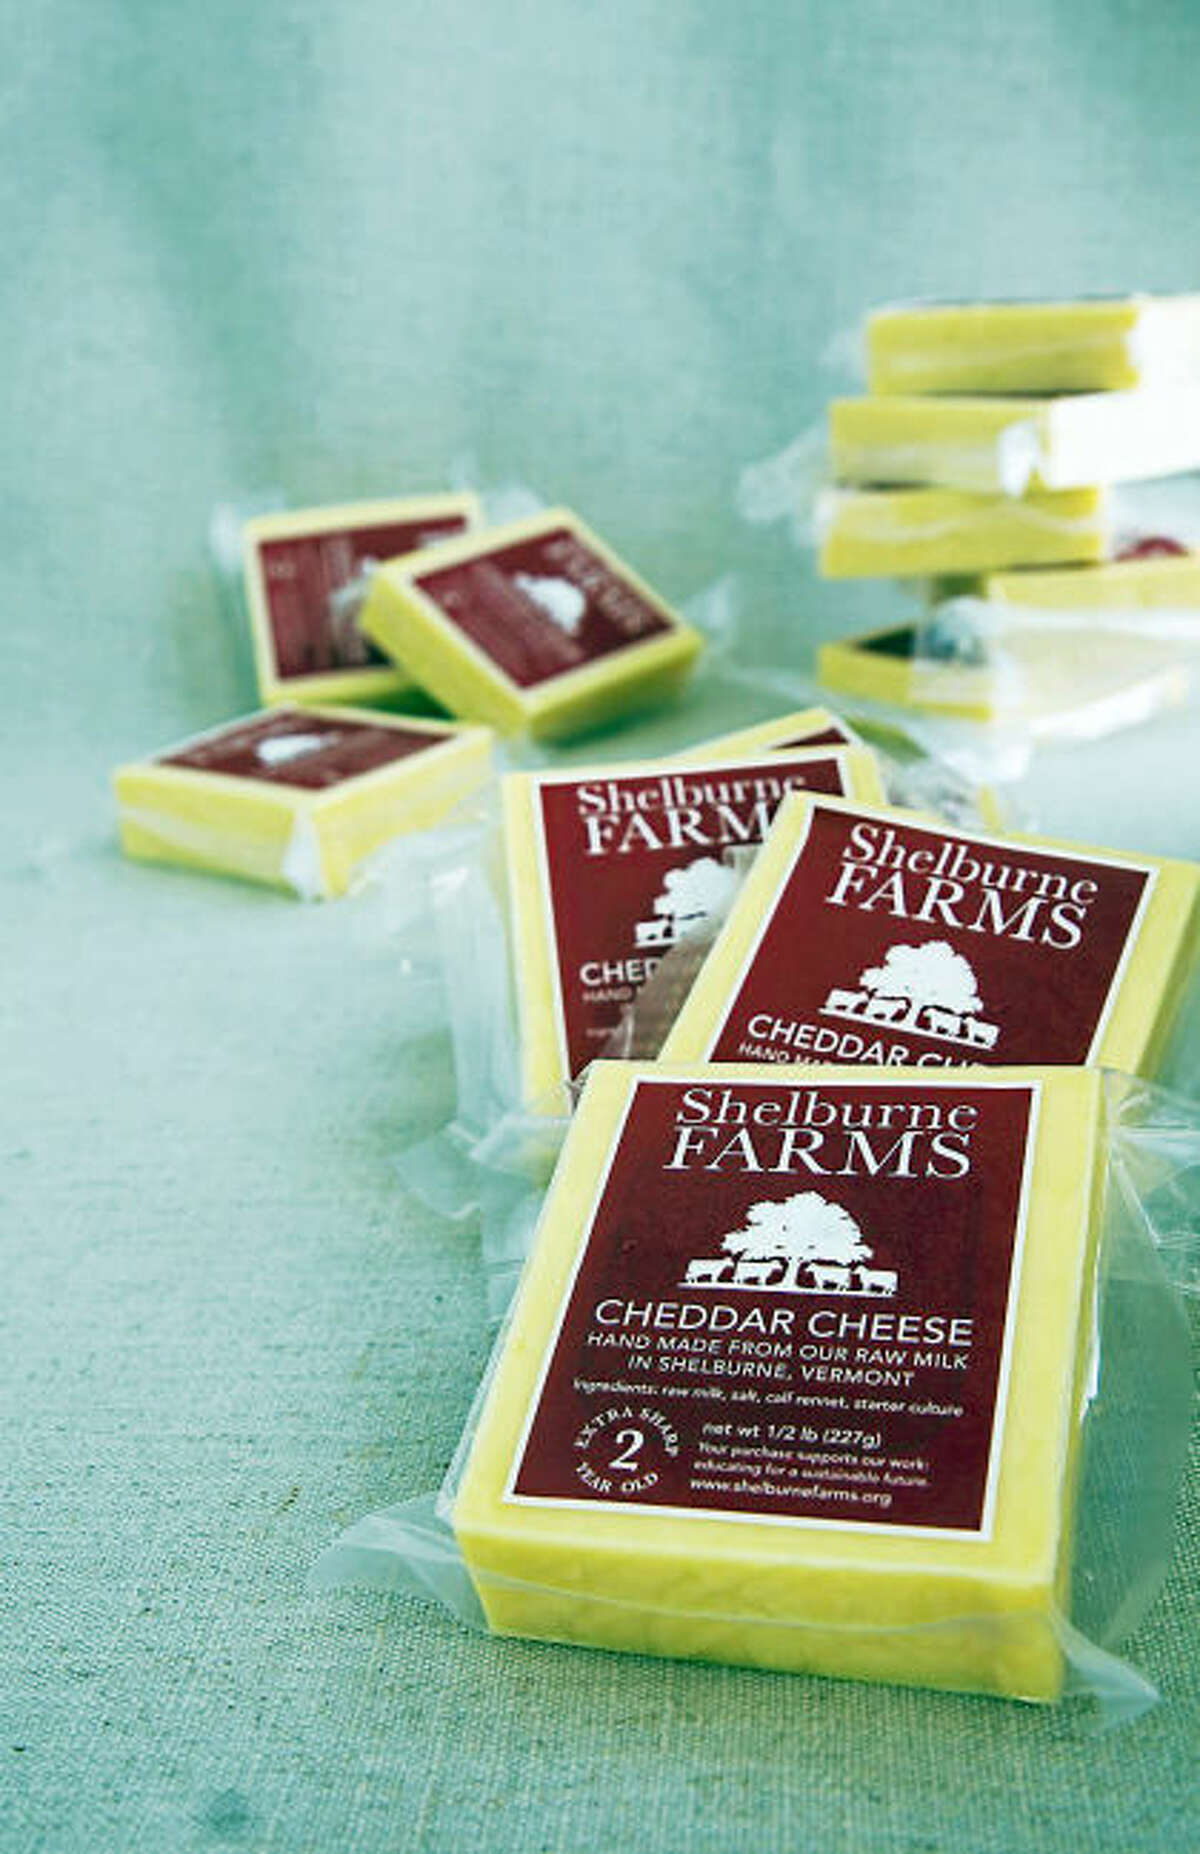 Cheeses from Shelburne Farms will be featured at the Farm Art Festival in Bethlehem on June 11, along with a number of other food and wine experts.